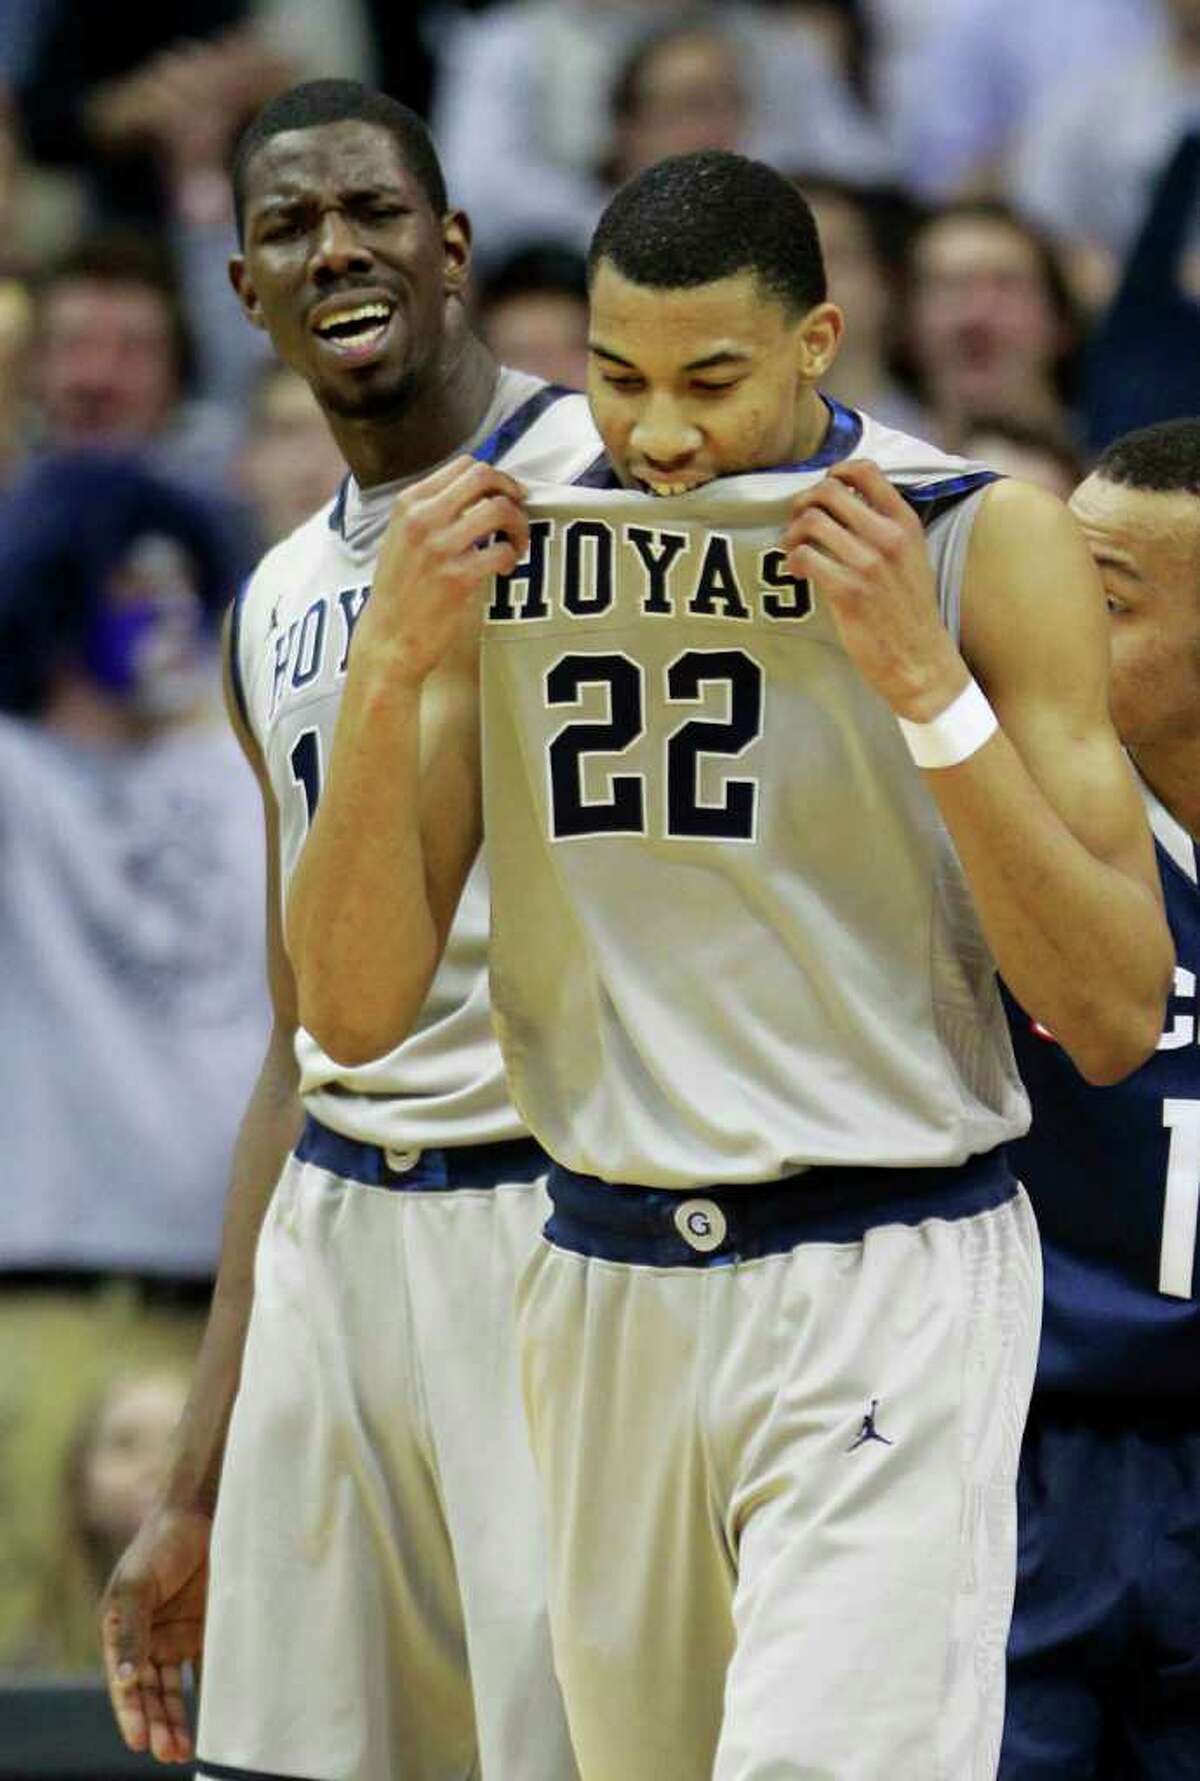 Georgetown's Otto Porter (22) and Henry Sims, rear, react to a play during the first half of an NCAA college basketball game against Connecticut, Wednesday, Feb. 1, 2012, in Washington. (AP Photo/Haraz Ghanbari)